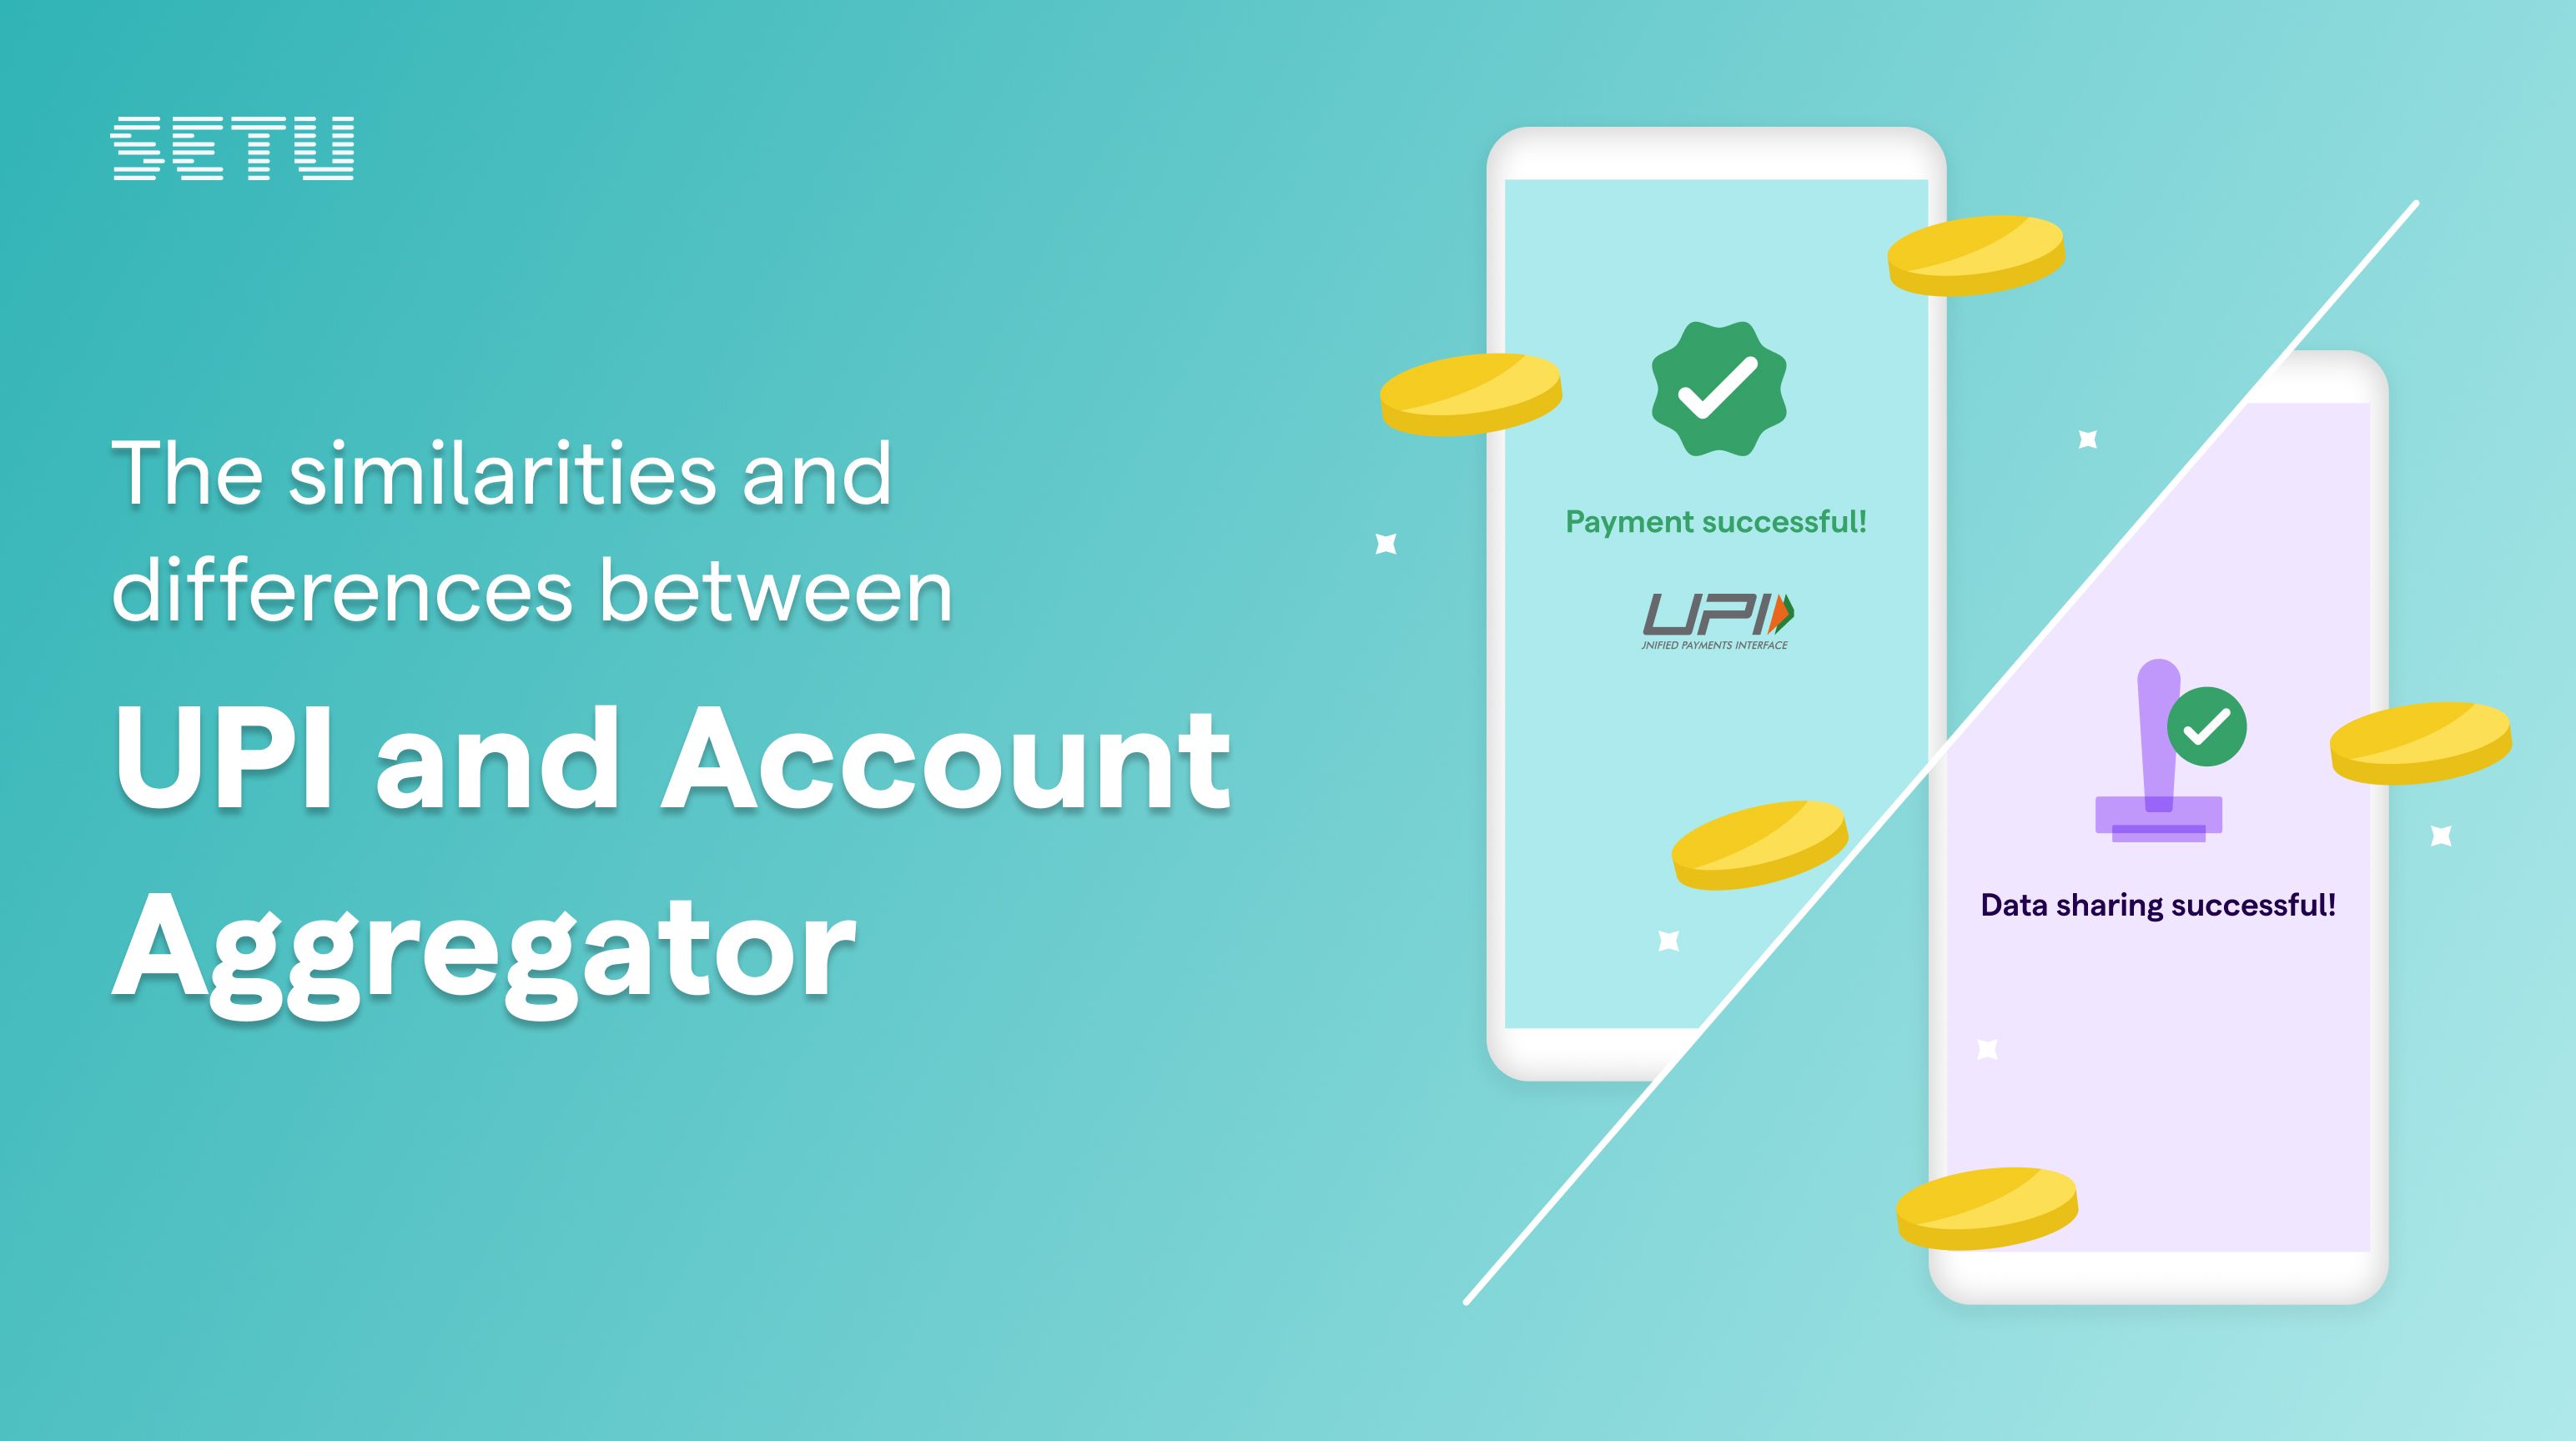 The similarities and differences between UPI and Account Aggregator  title image